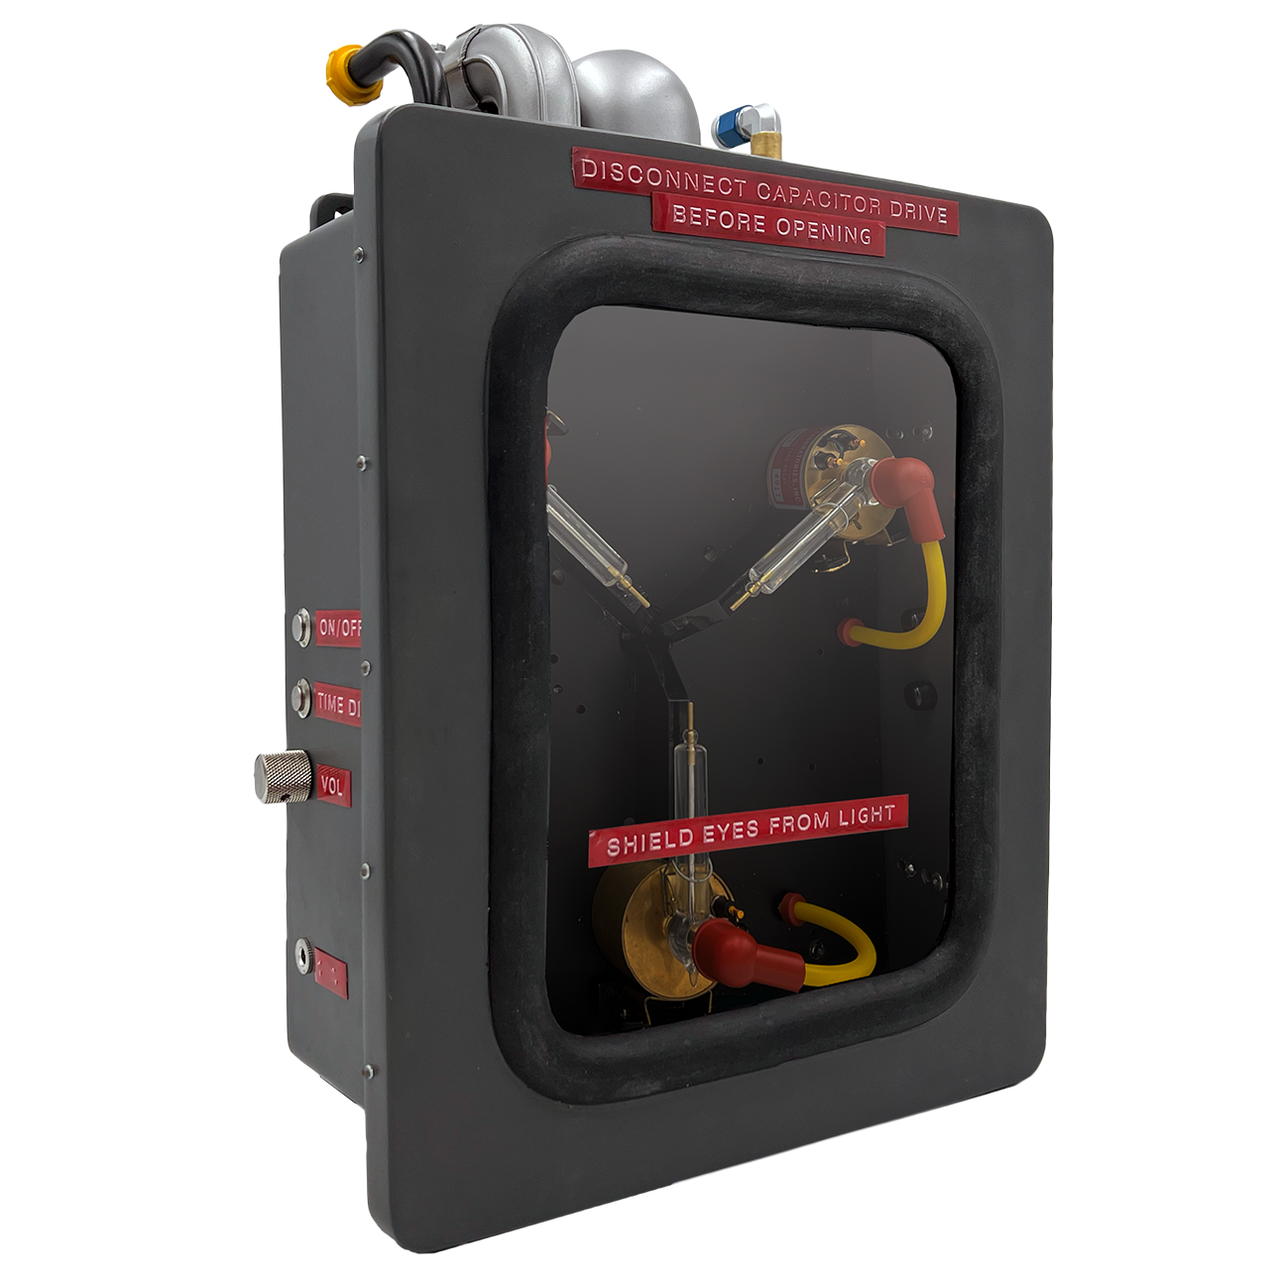 Factory Entertainment Flux Capacitor 1:1 Scale Prop Replica Back To The Future 408787 1